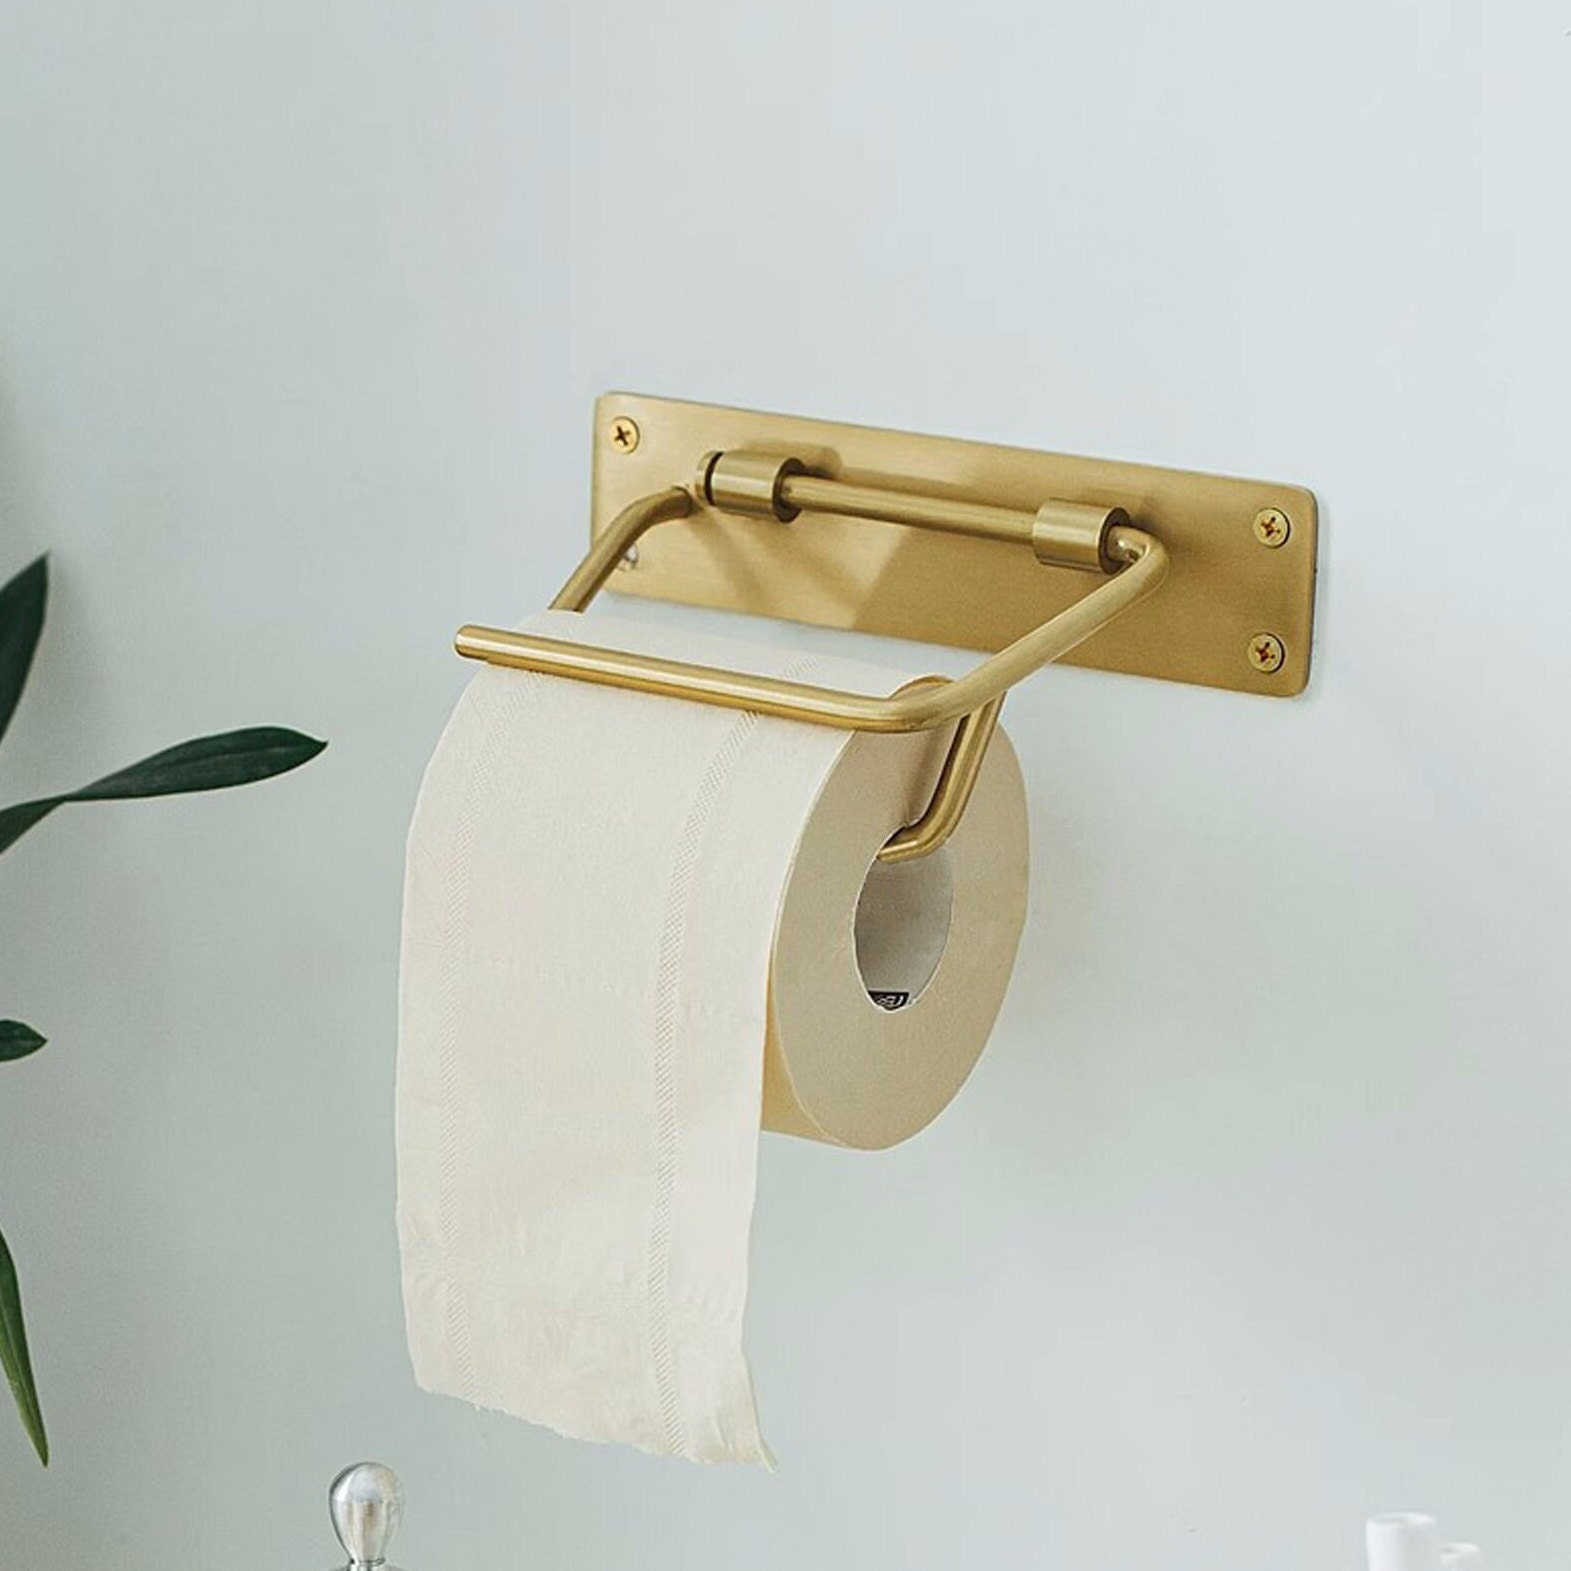  Beelee Bathroom Tissue Holder/Toilet Paper Holder Solid Brass  Wall-Mounted Toilet Roll Holder, Toilet Paper Tissue Holder with Mobile  Phone Storage Shelf Antique Brass Finished : Tools & Home Improvement